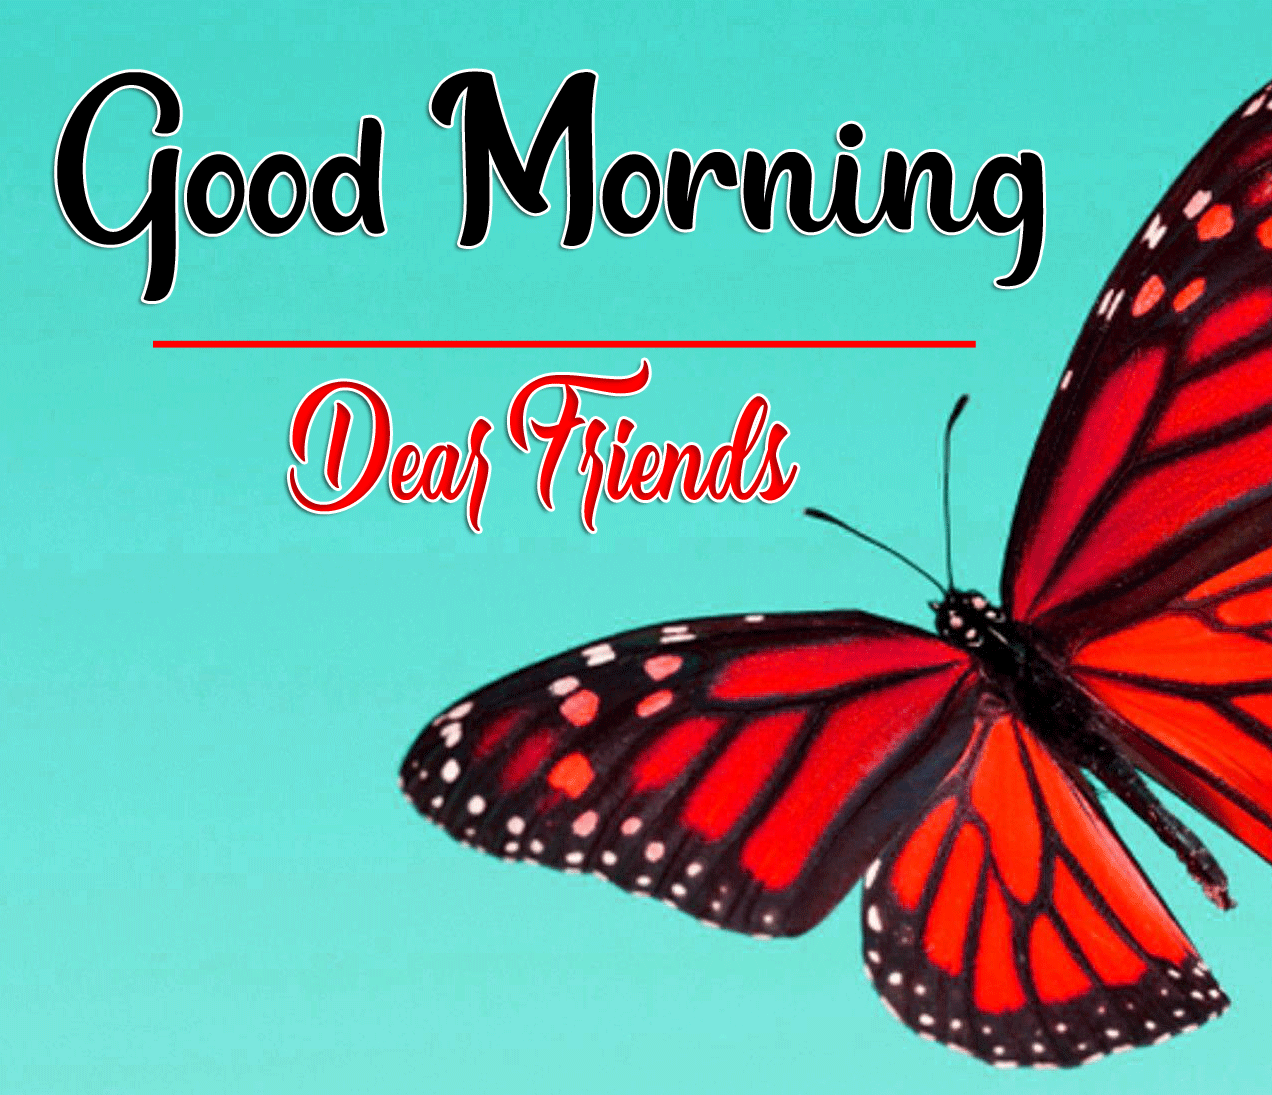 Good Morning Wishes Images HD 1080p 12